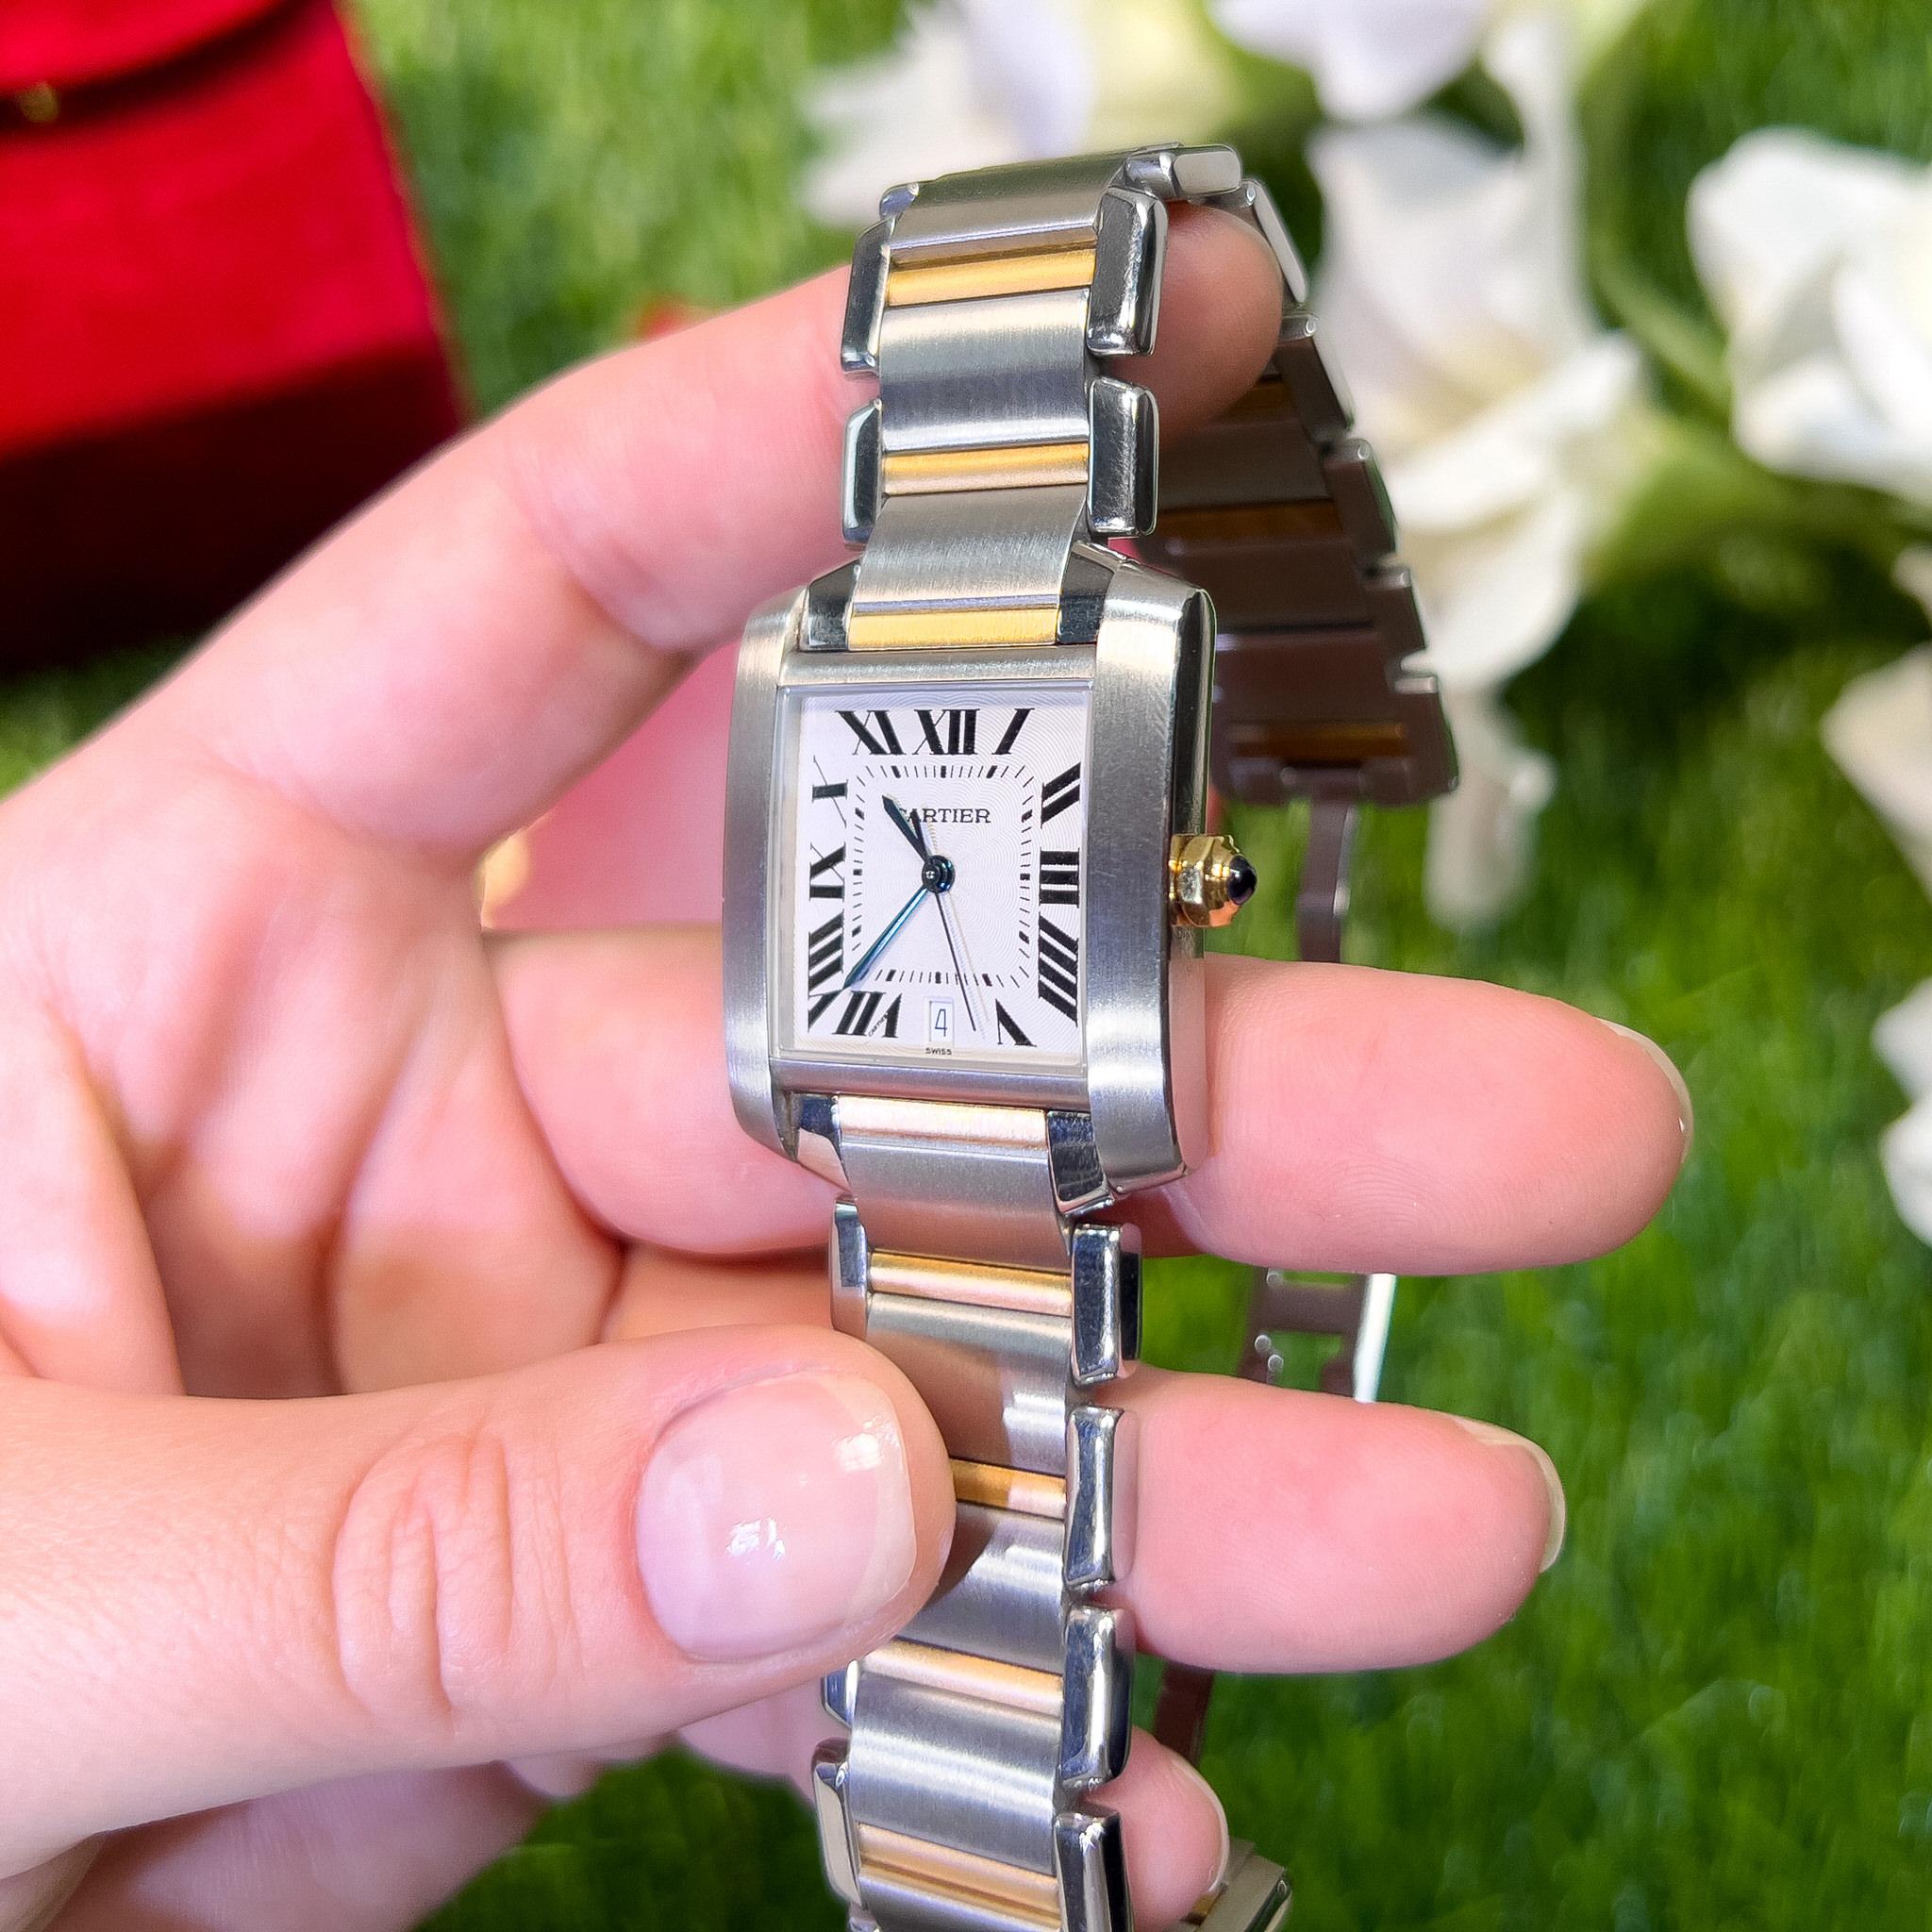 Cartier Tank Francaise Watch Two Tone Large Model W51005Q4 Original Papers Pouch 1